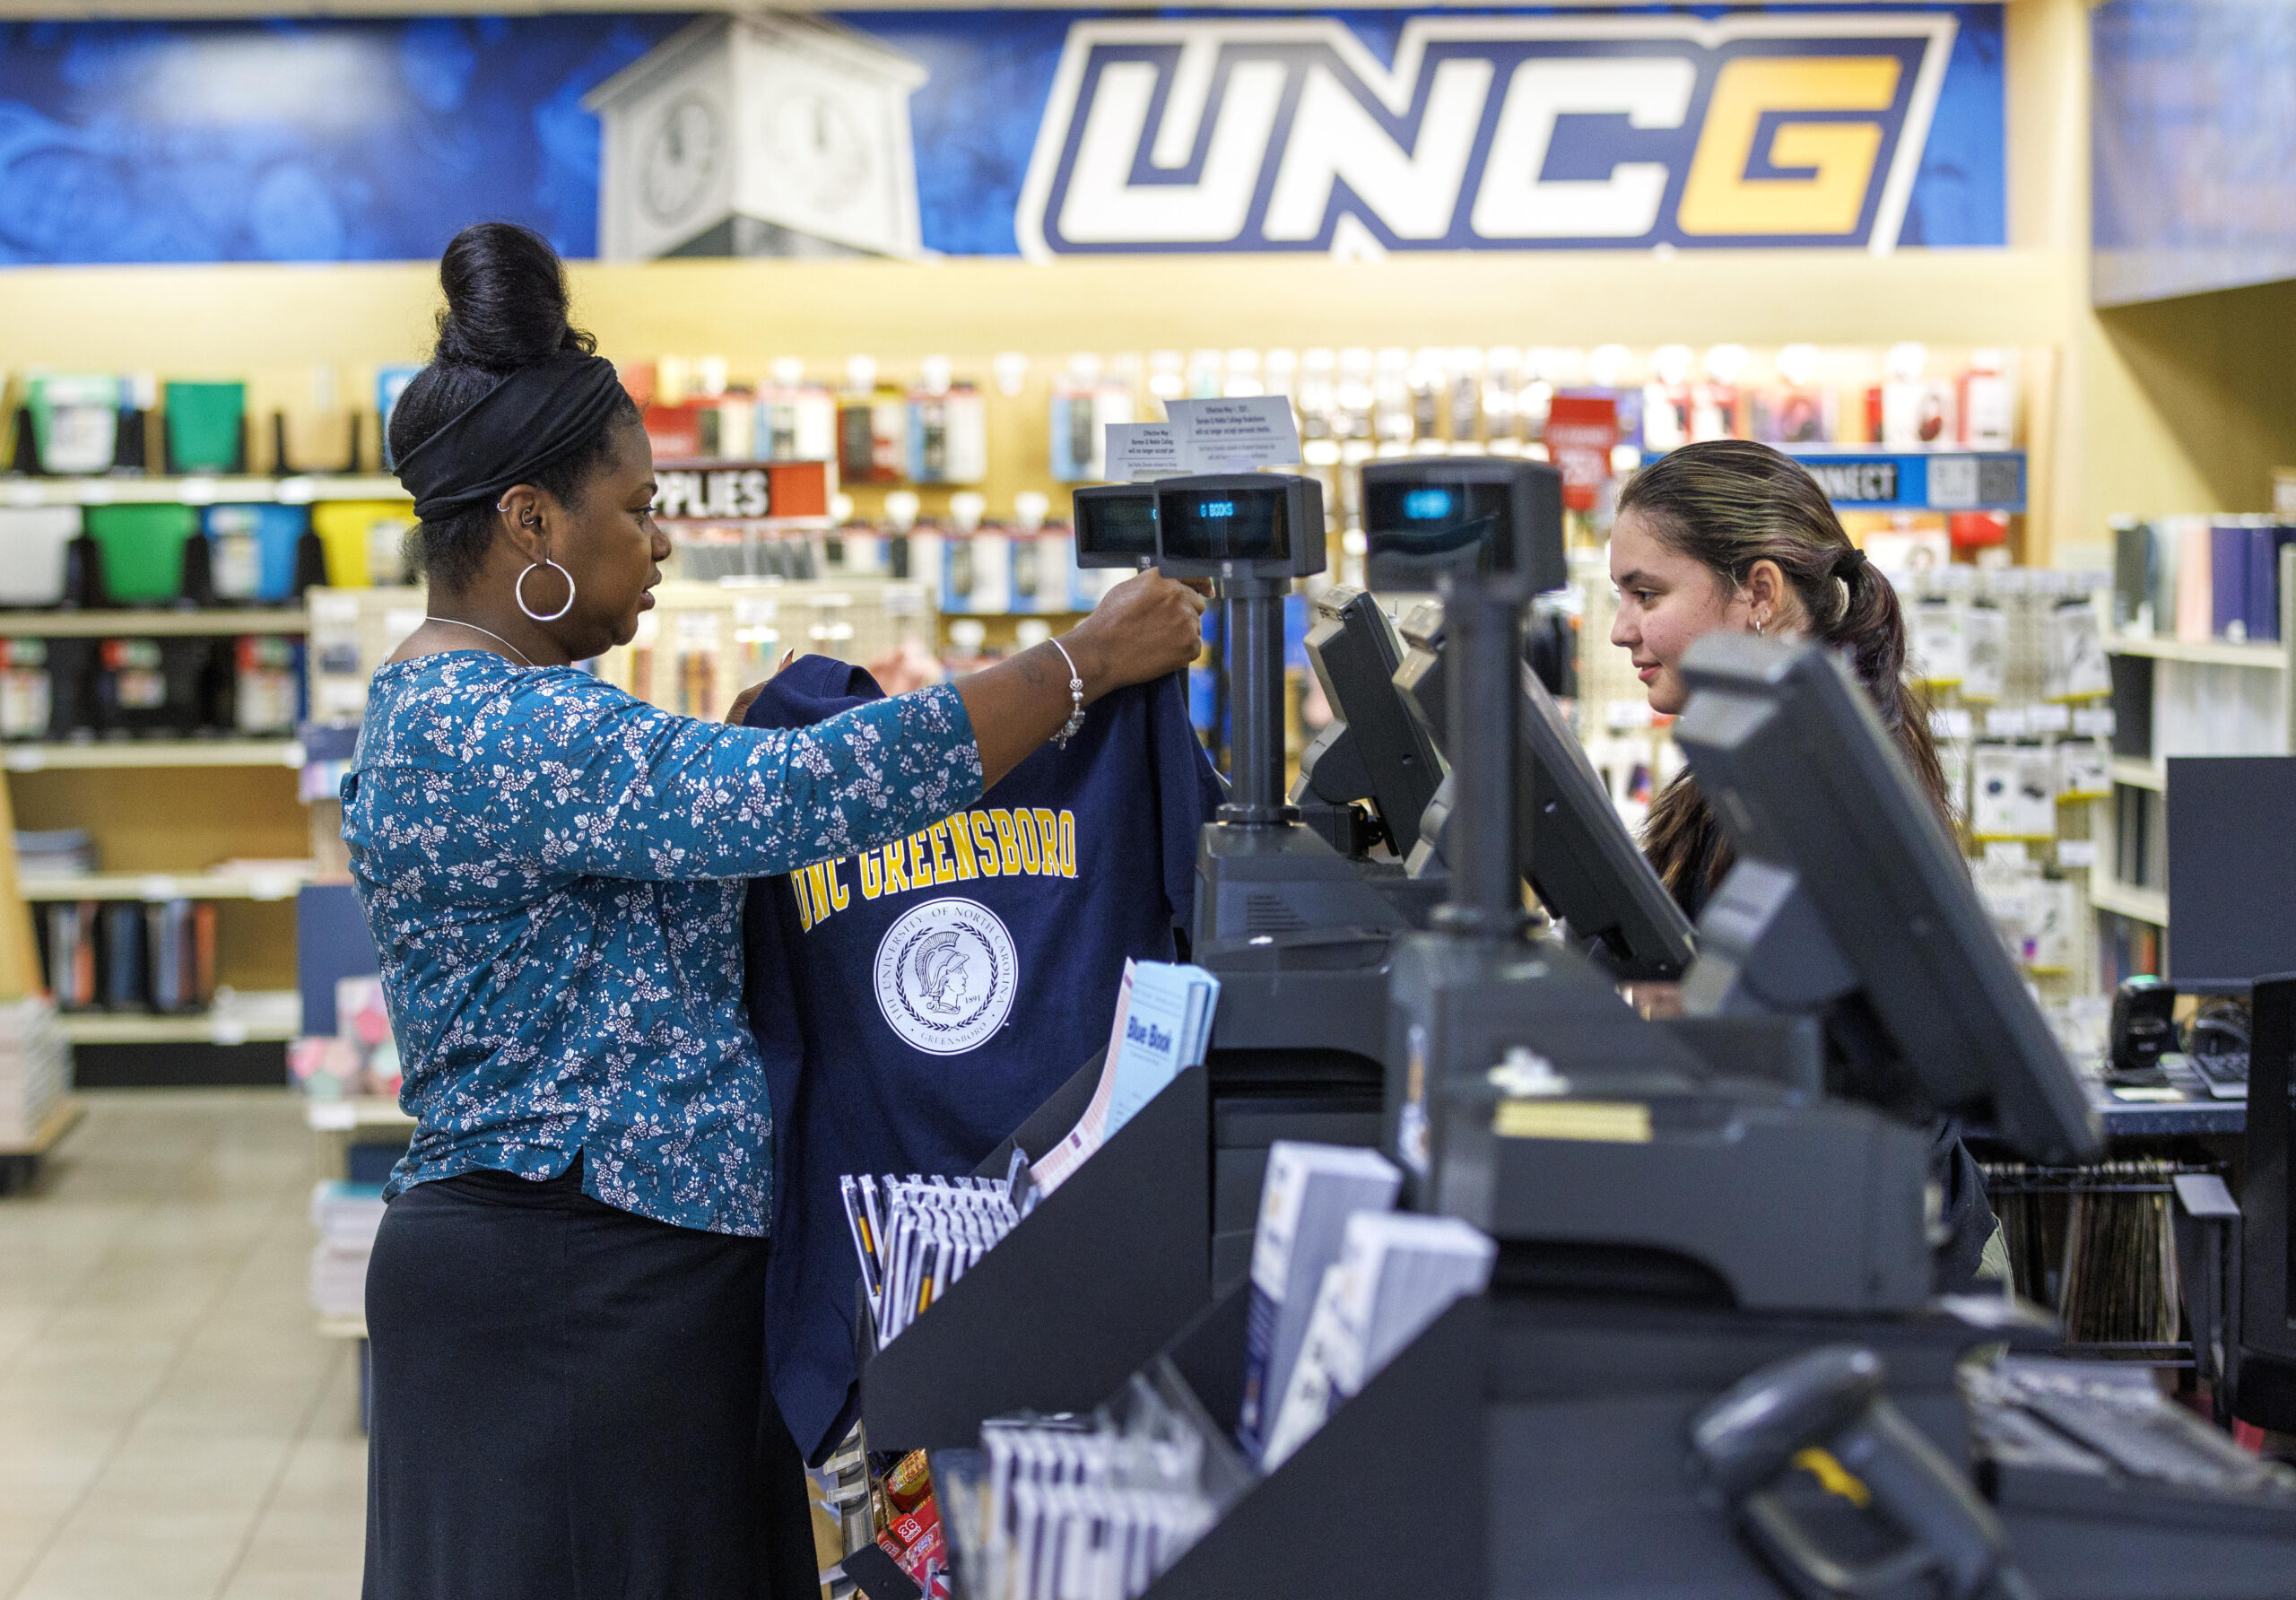 Alumna shops in UNCG bookstore before homecoming weekend.